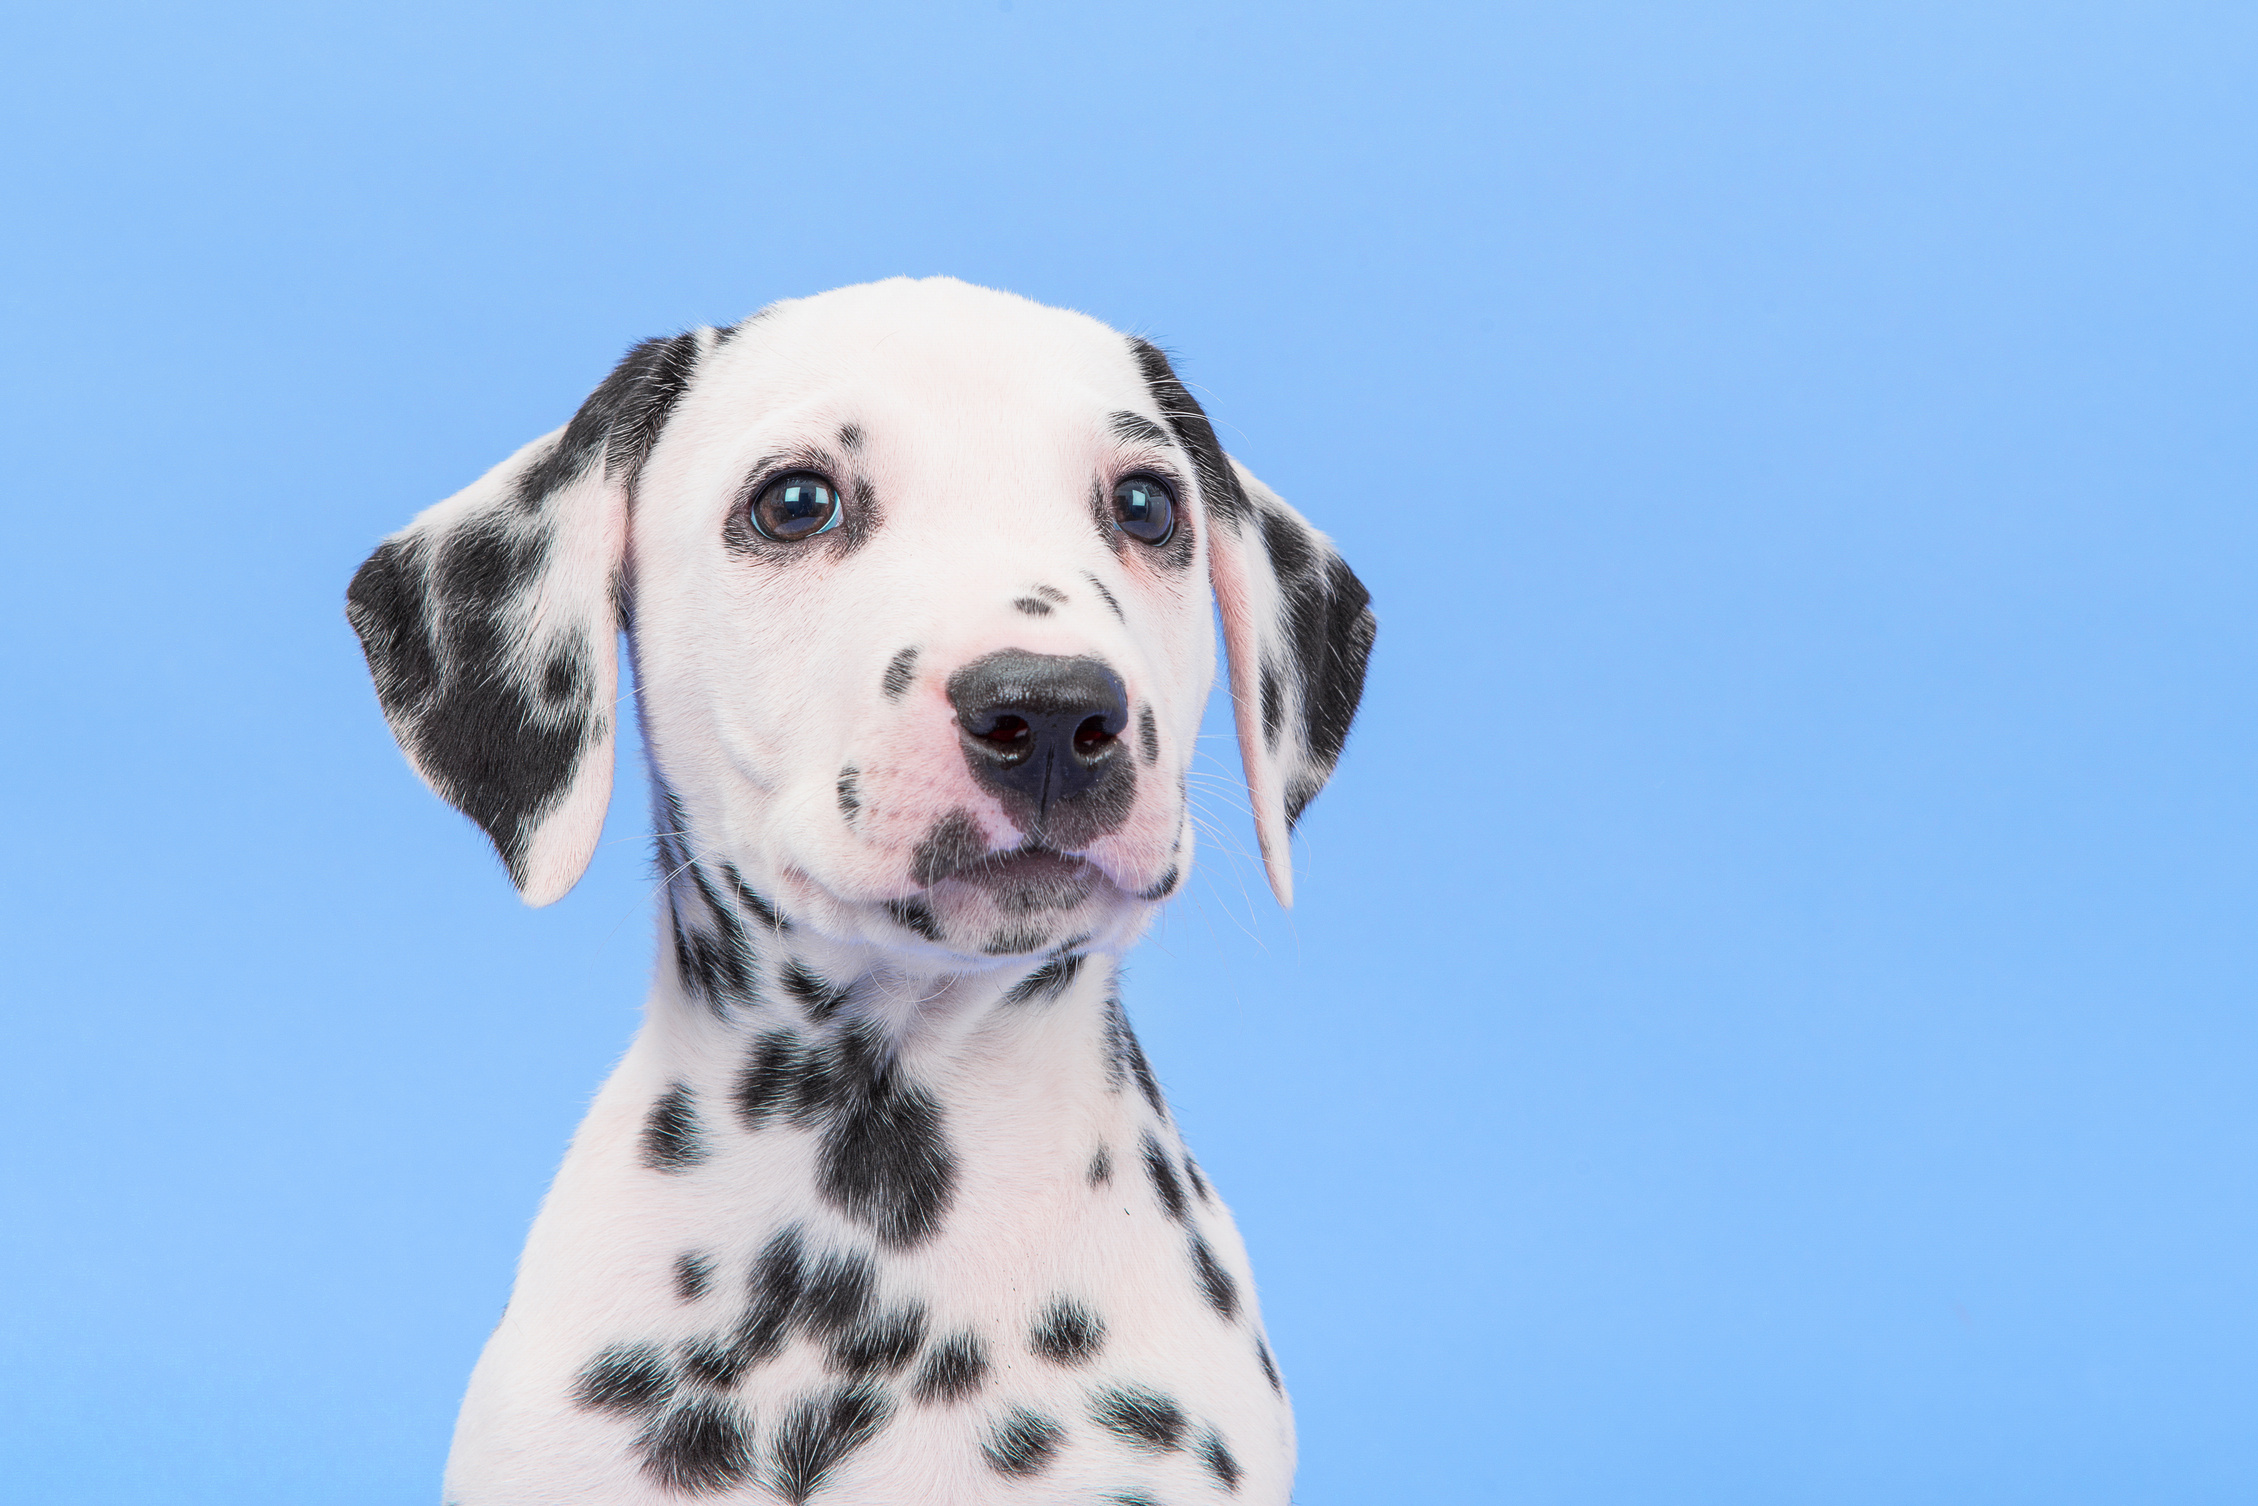 Cute black and white dalmatian puppy portrait facing the camera on a blue background